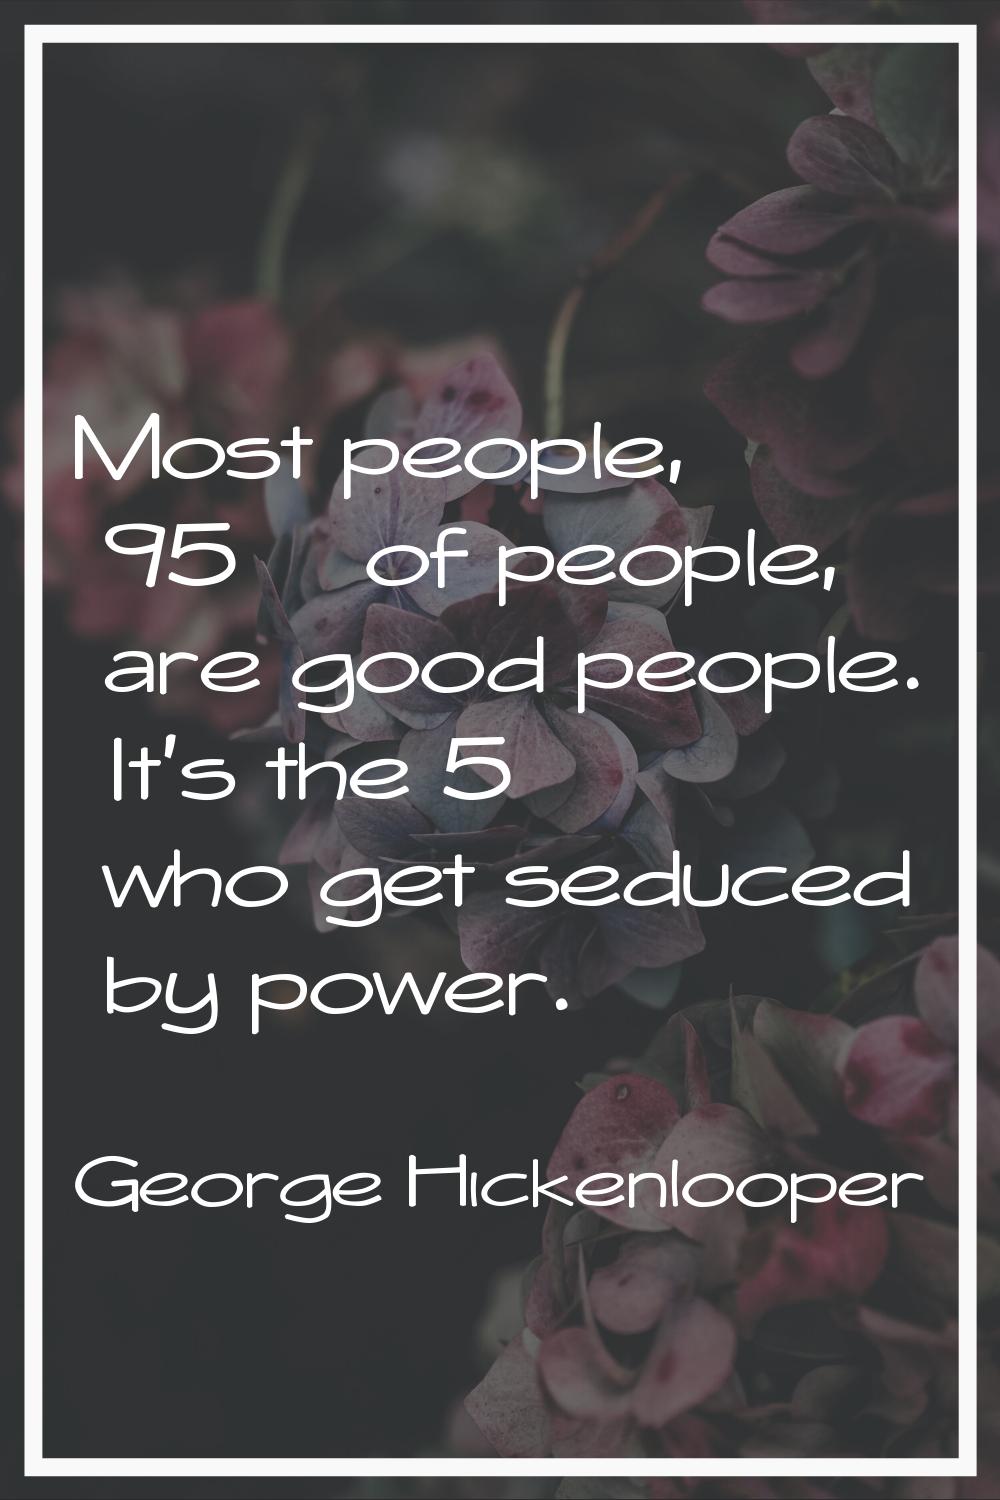 Most people, 95% of people, are good people. It's the 5% who get seduced by power.